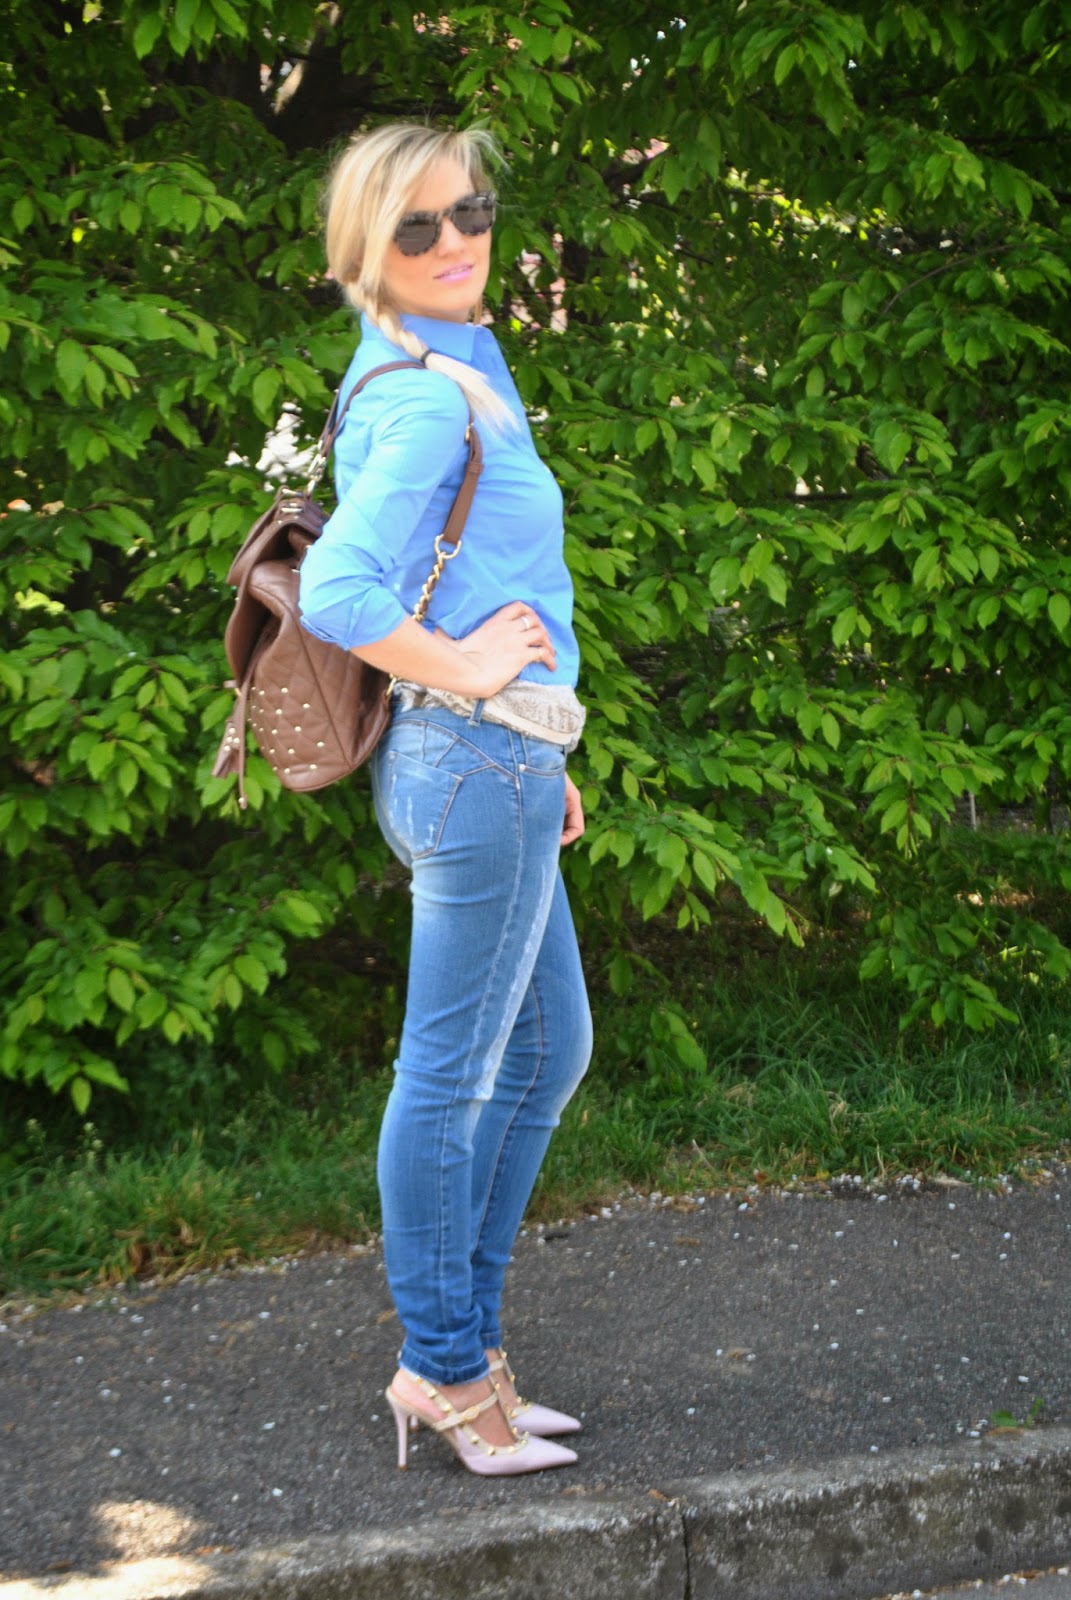 outfit jeans e camicia outfit jeans e tacchi mariafelicia magno colorblock by felym mariafelicia magno fashion blogger come abbinare jeans e tacchi come abbinare la camicia azzurra outfit blu outfit zainetto come abbianre lo zainetto  outfit aprile 2015 outfit primaverili casual how to wear jeans and heels outfit jeans and heels outfit blue shirt how to wear blue shirt valentino shoes backpack fashion bloggers italy girls blondie blonde hair blonde girls 